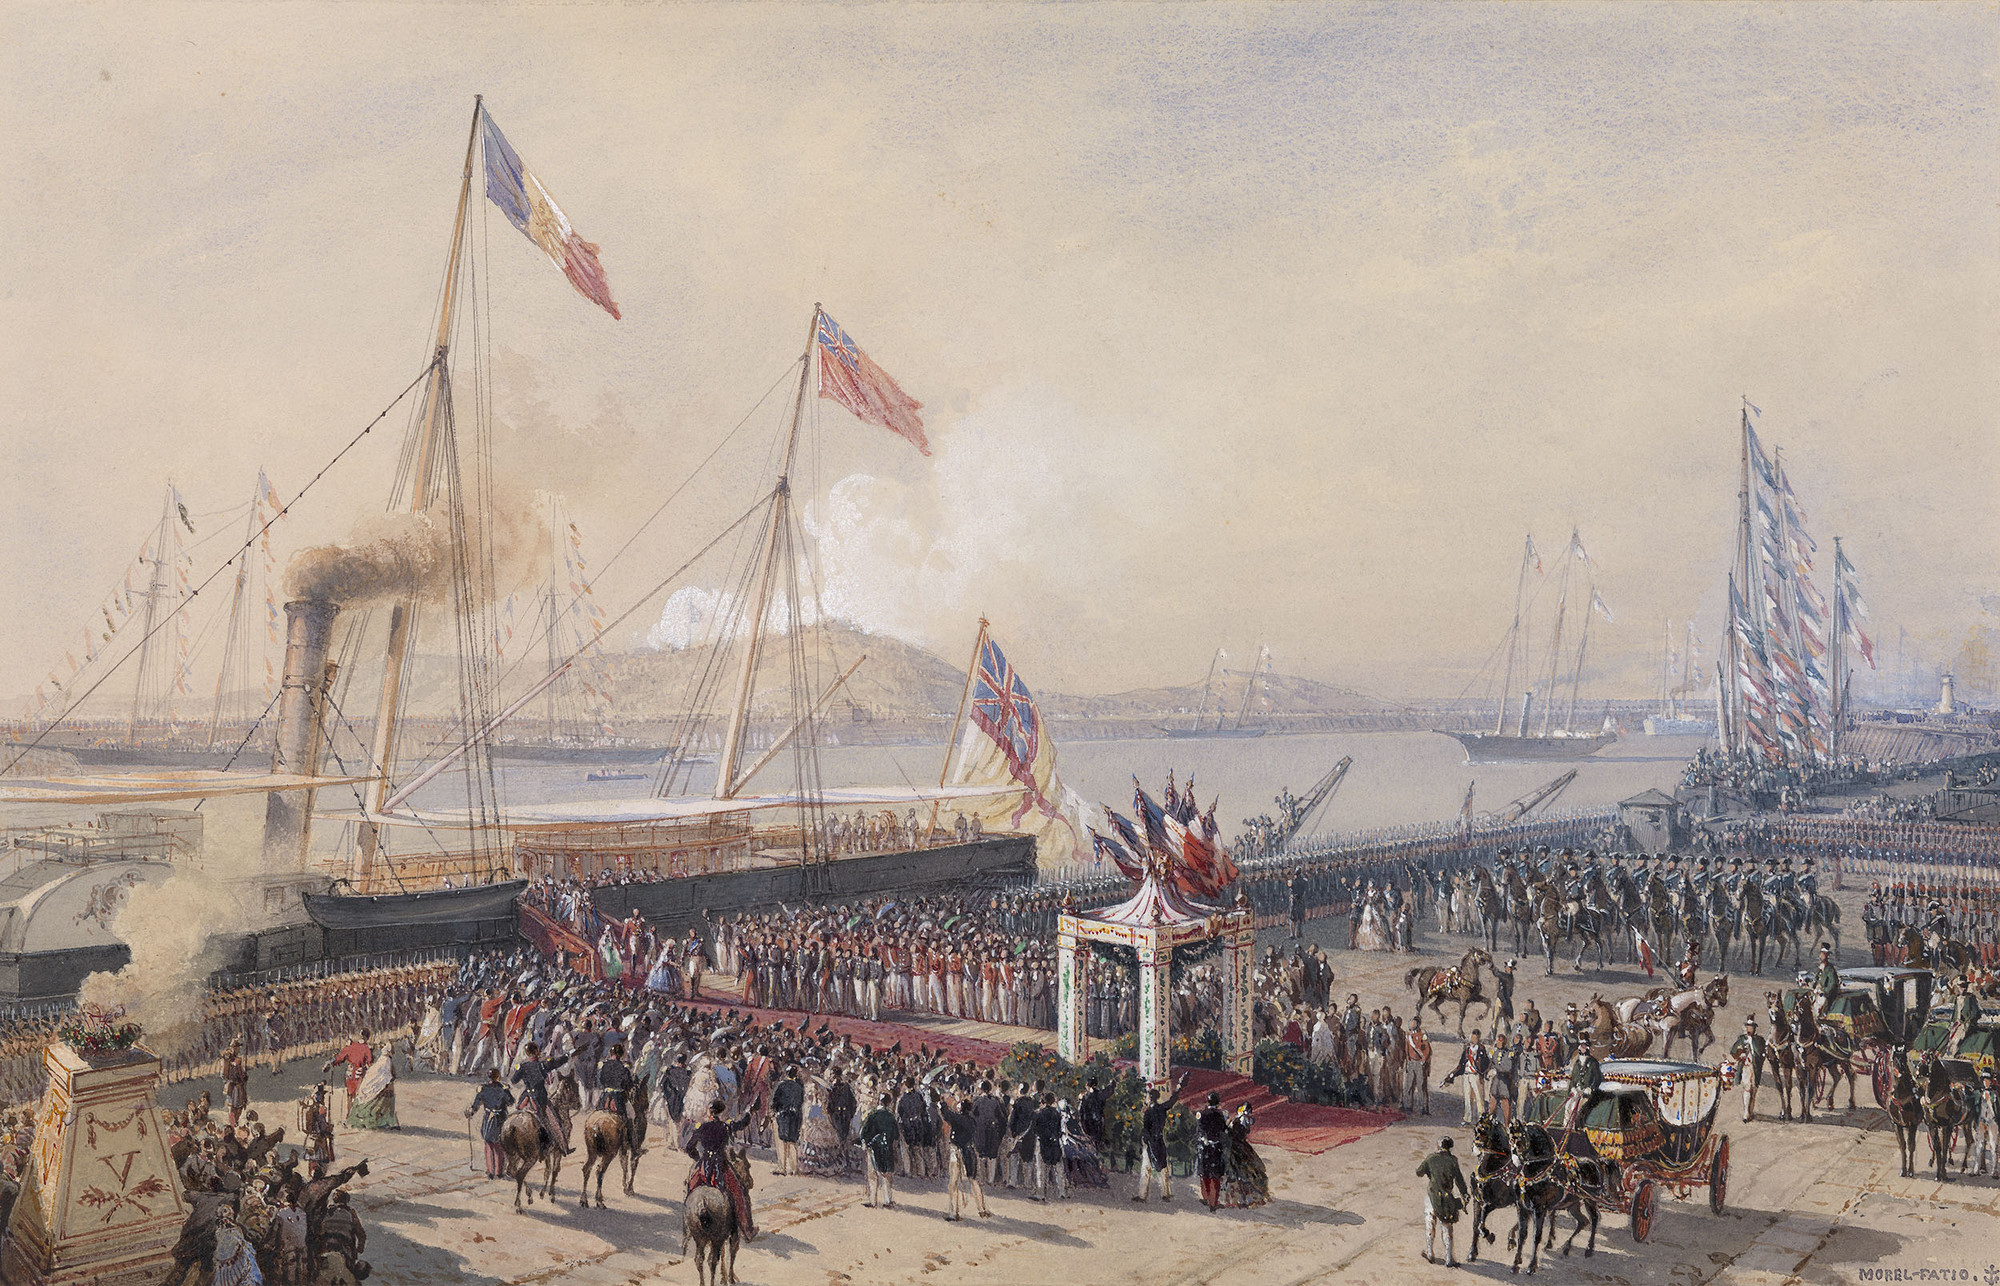 A watercolour and bodycolour drawing of the Royal Yacht&nbsp;in the harbour at Boulogne, greeted by crowds on the shore. Queen Victoria is disembarking from the boat, greeted by Napoleon III. Signed at lower right: MOREL-FATIO and with an anchor pictogram